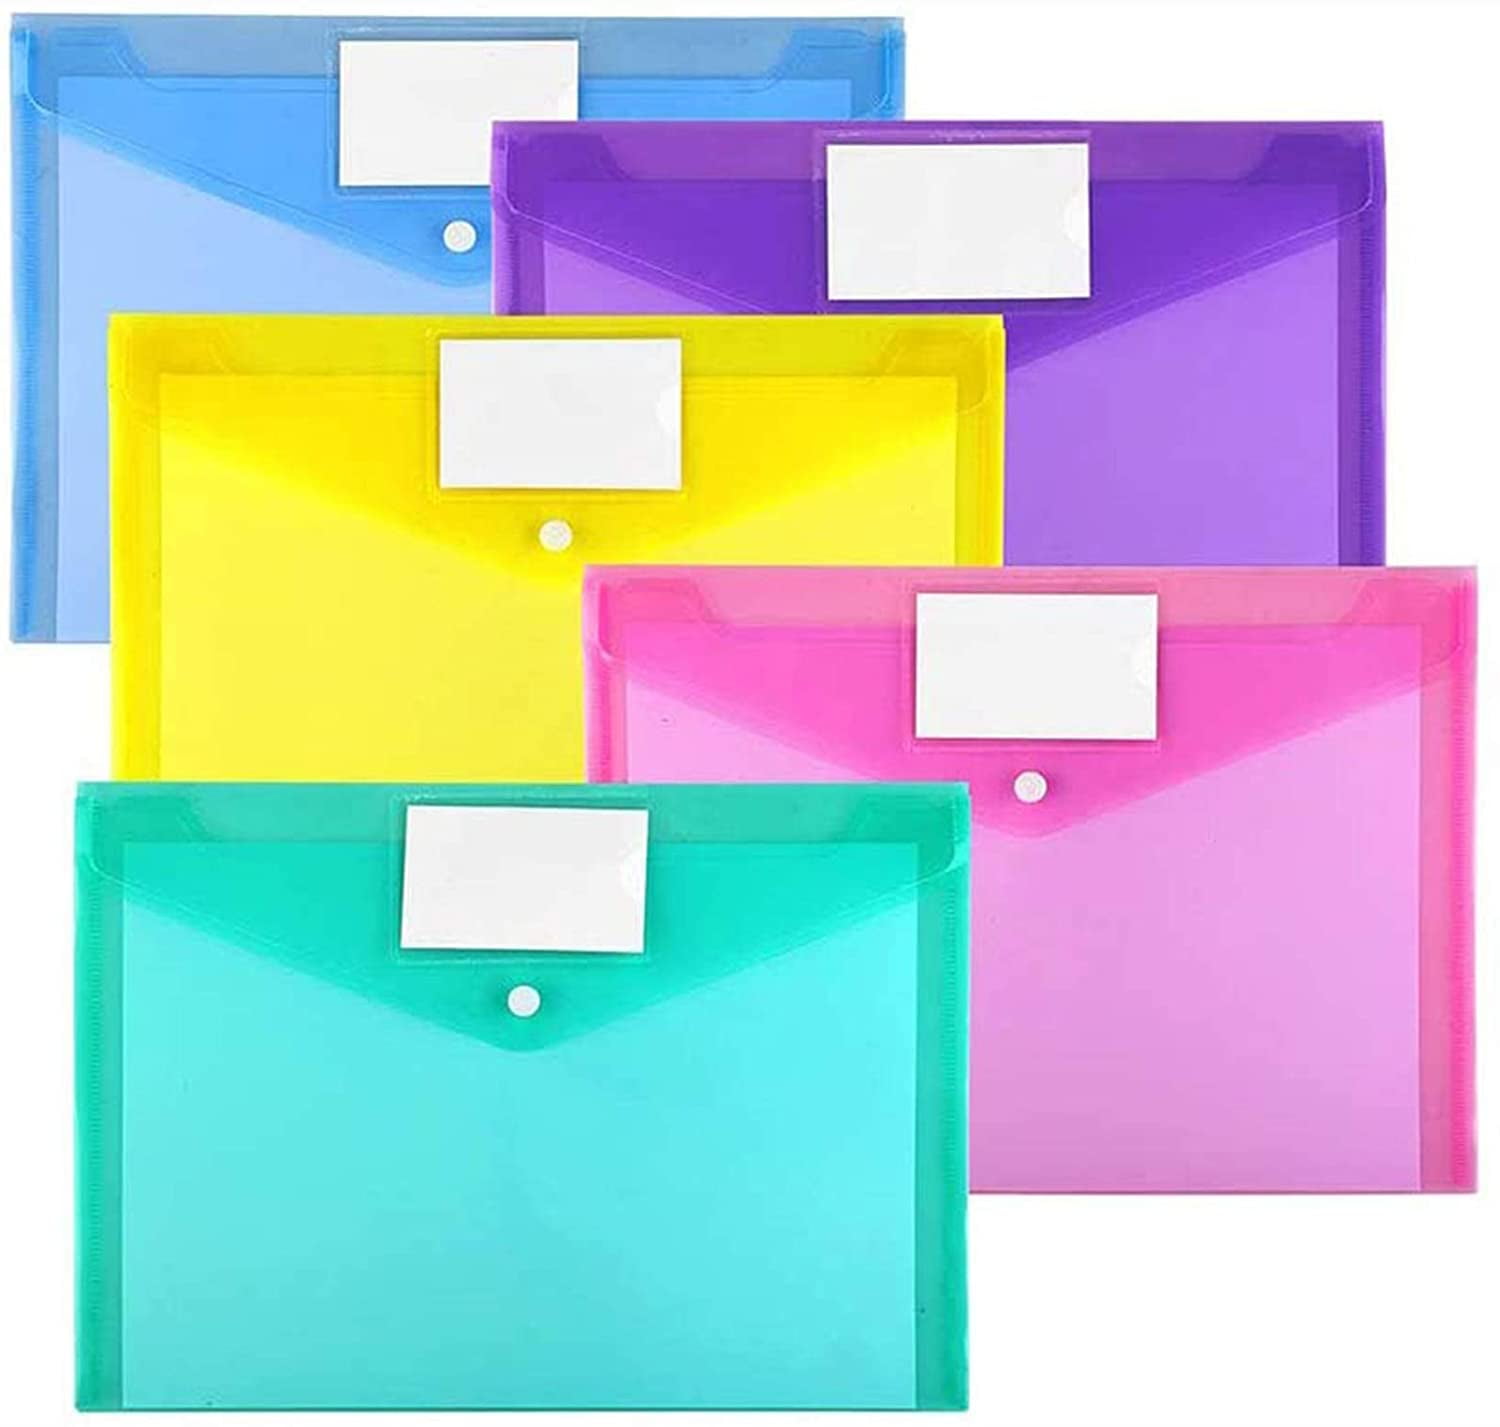 Button Closure |Storage Solution for Business School & Office Supplies Accordion Document & Paperwork Organizer Home Classroom |Pack of 5 Colors 5 Pockets Expanding File Folders A4 Letter Size 